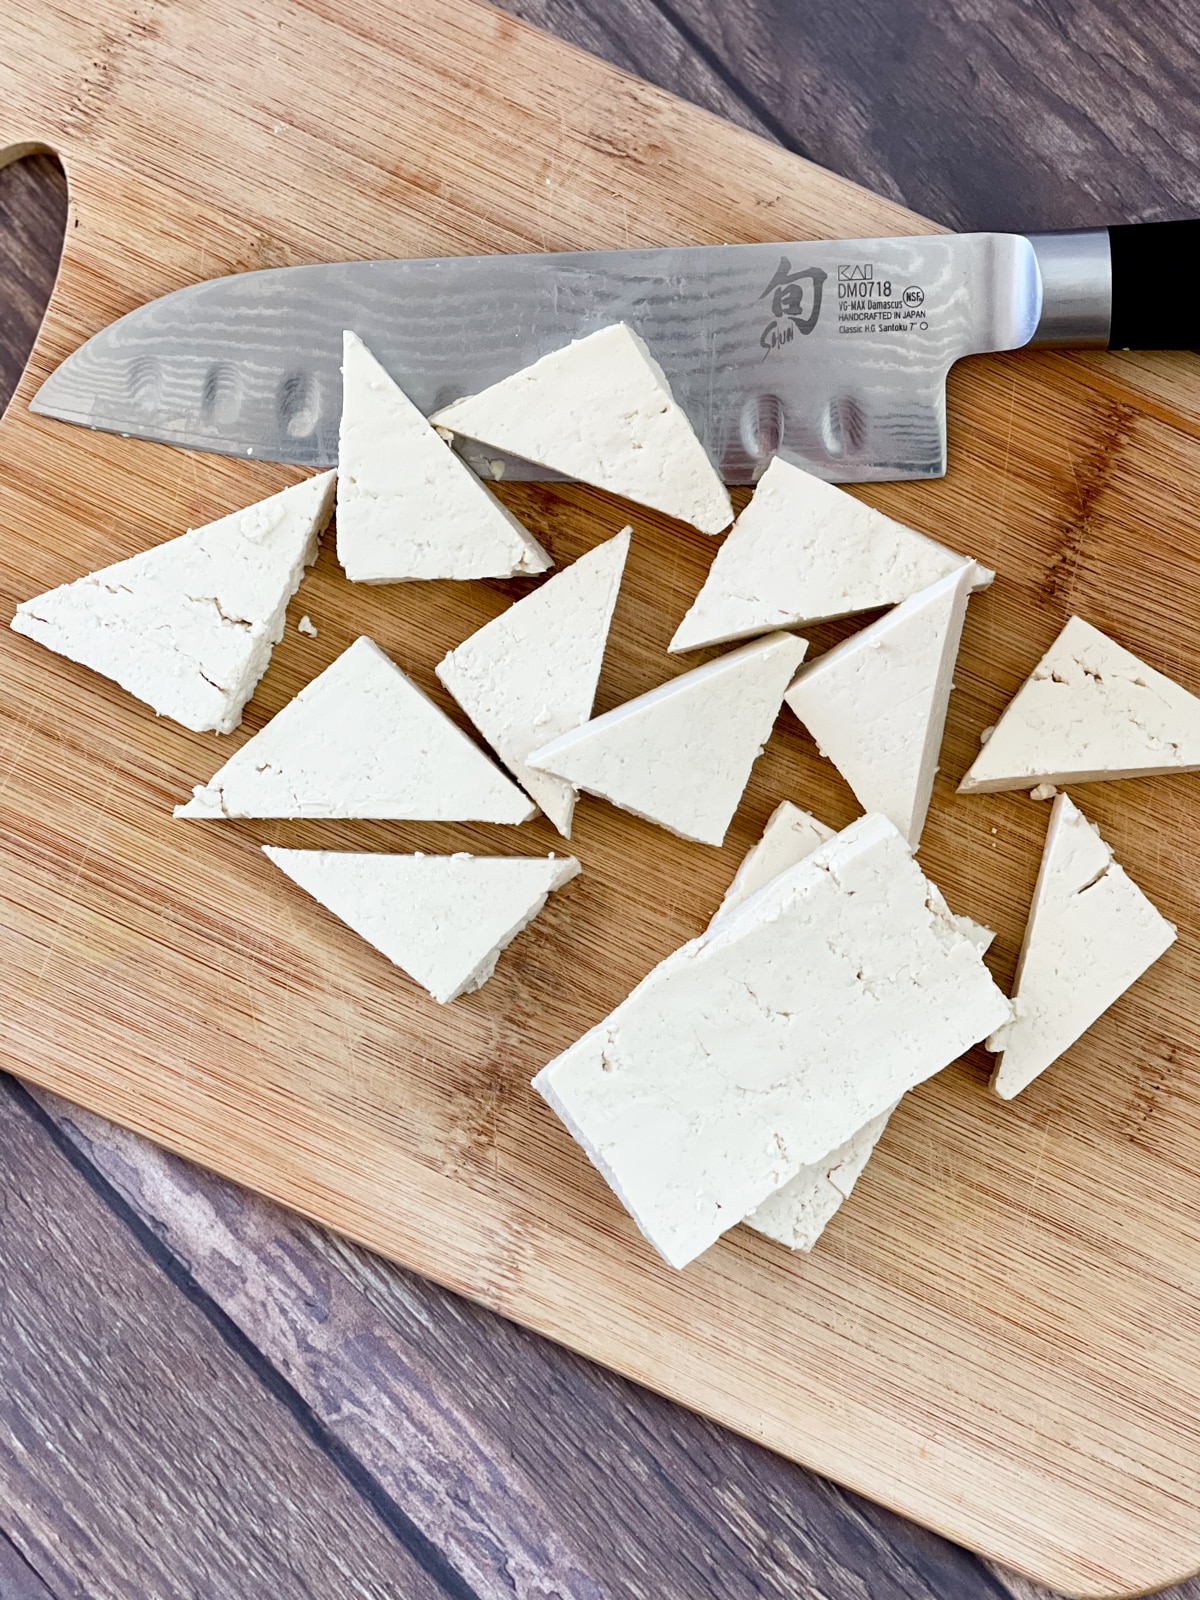 Tofu triangles being cut on a wooden cutting board with a chefs knife on the side.